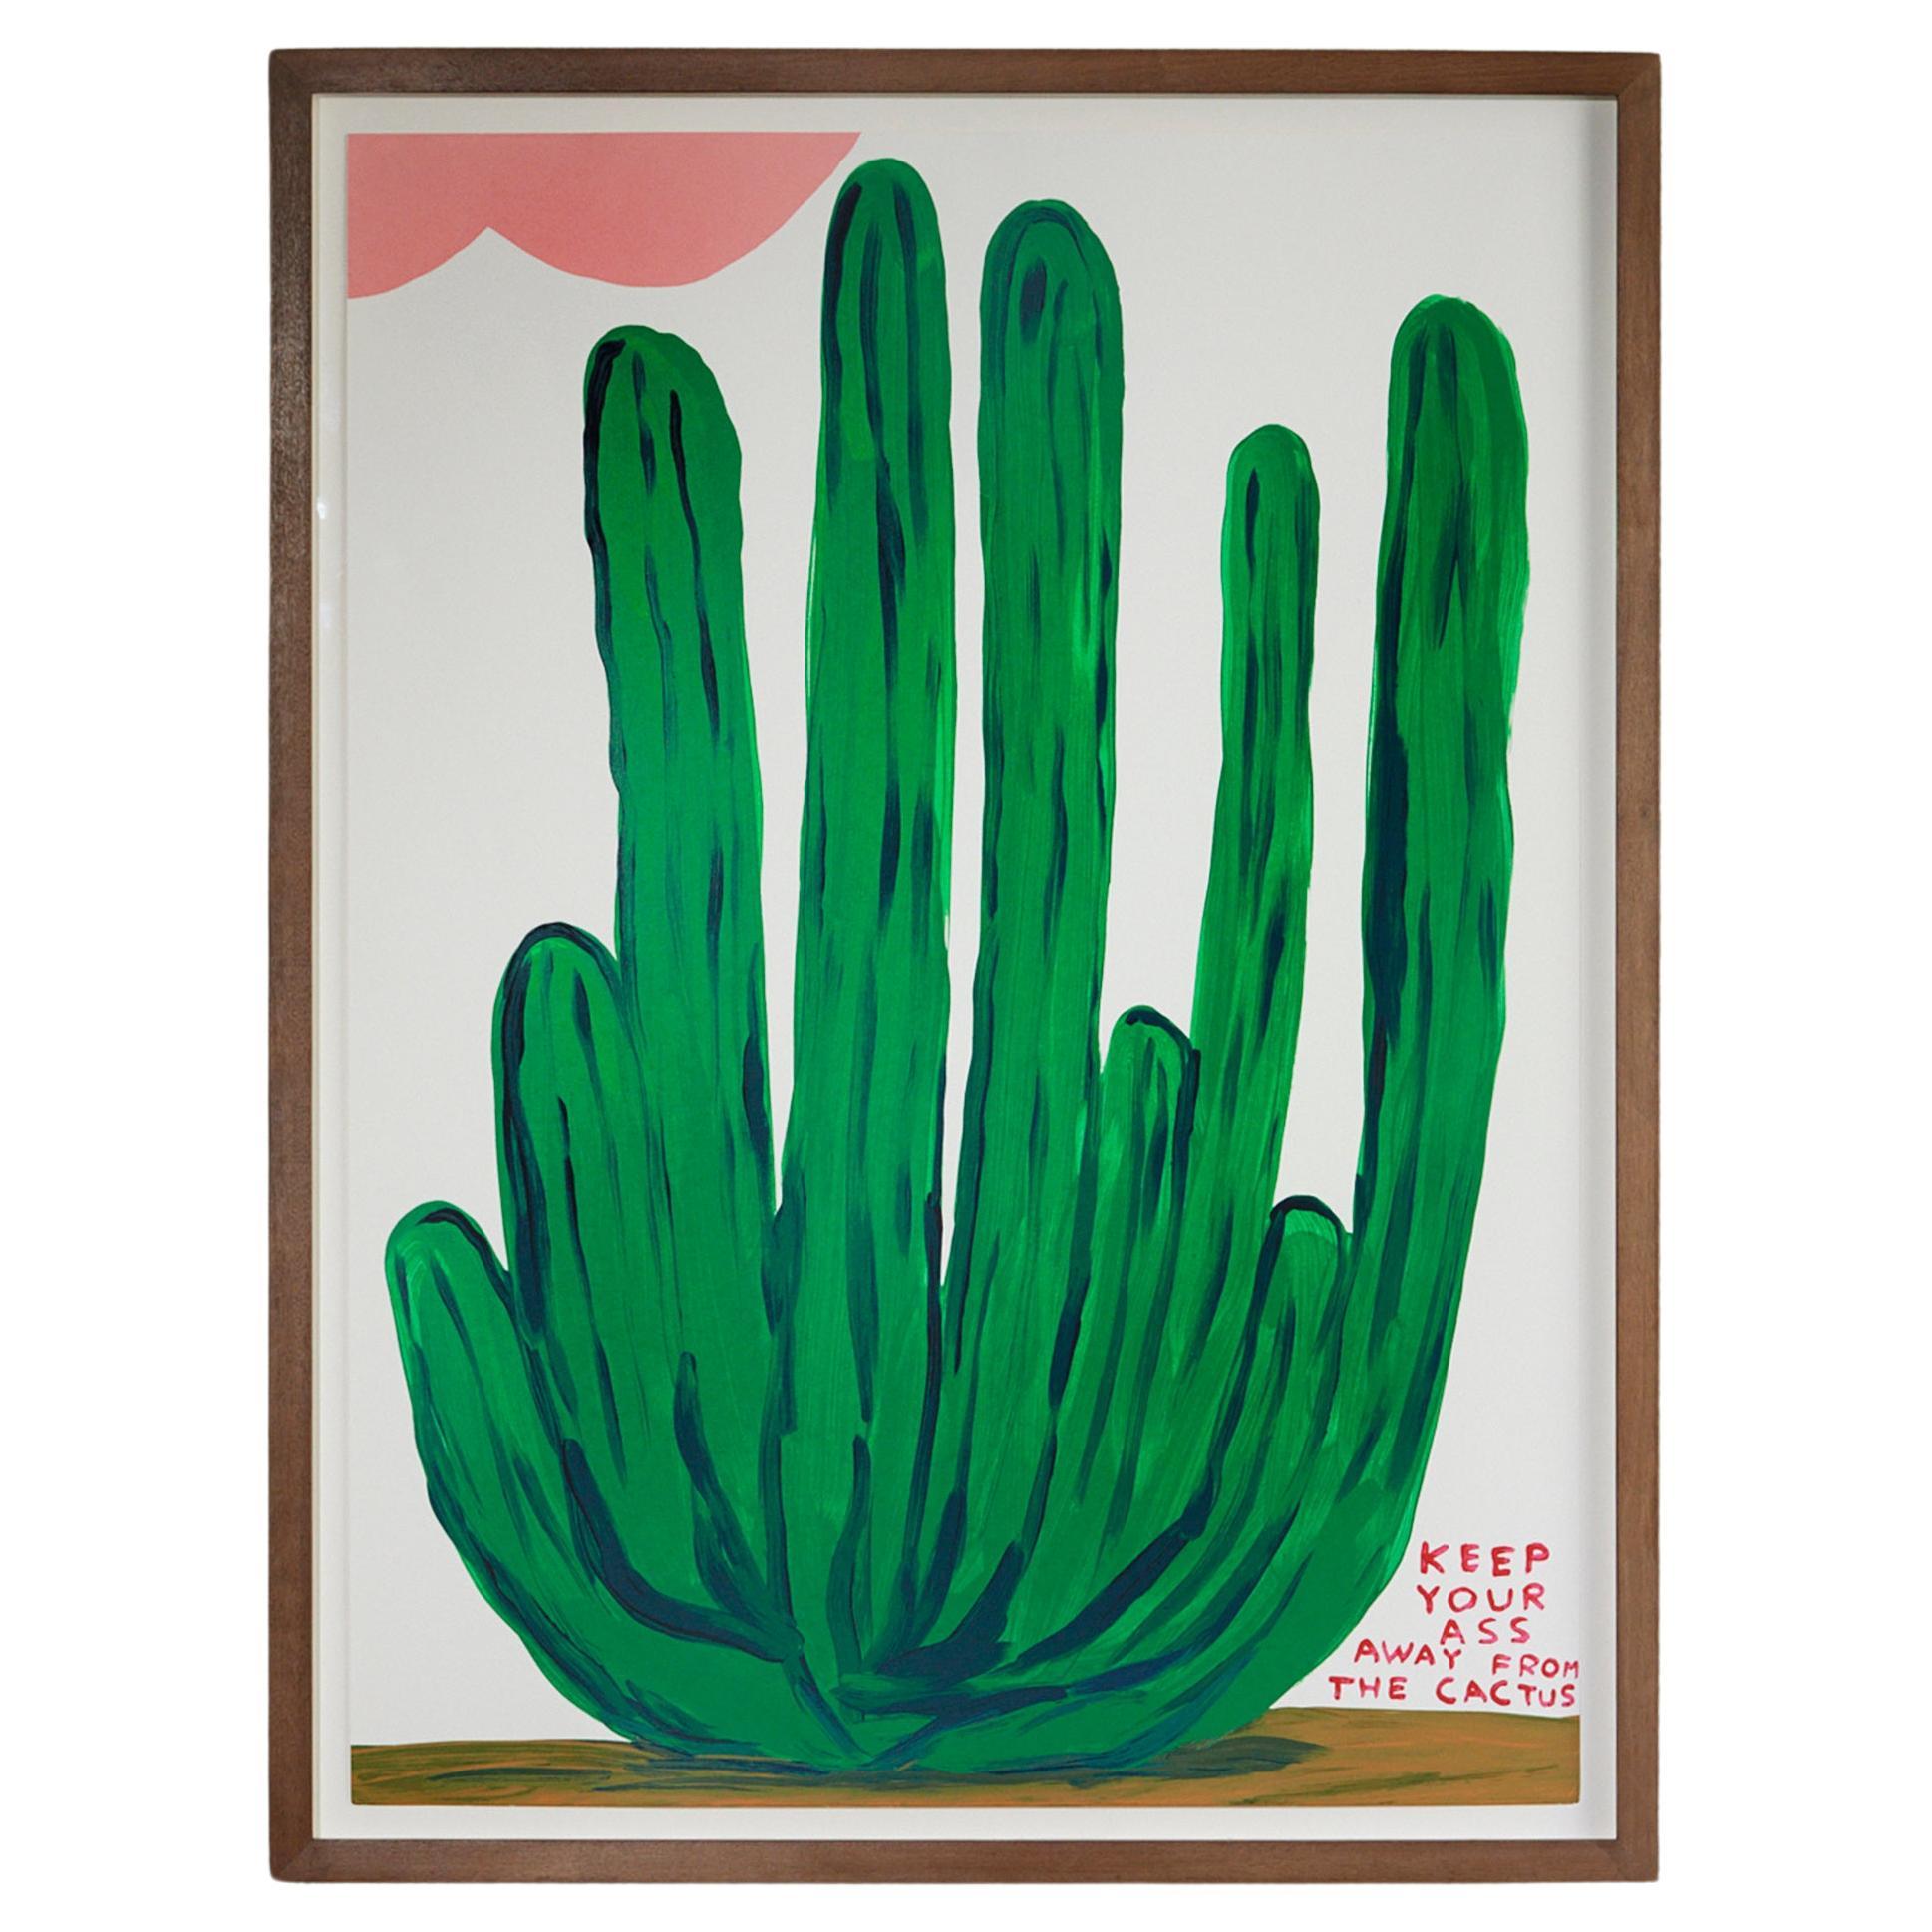 'Keep Your Ass Away From the Cactus' by David Shrigley For Sale